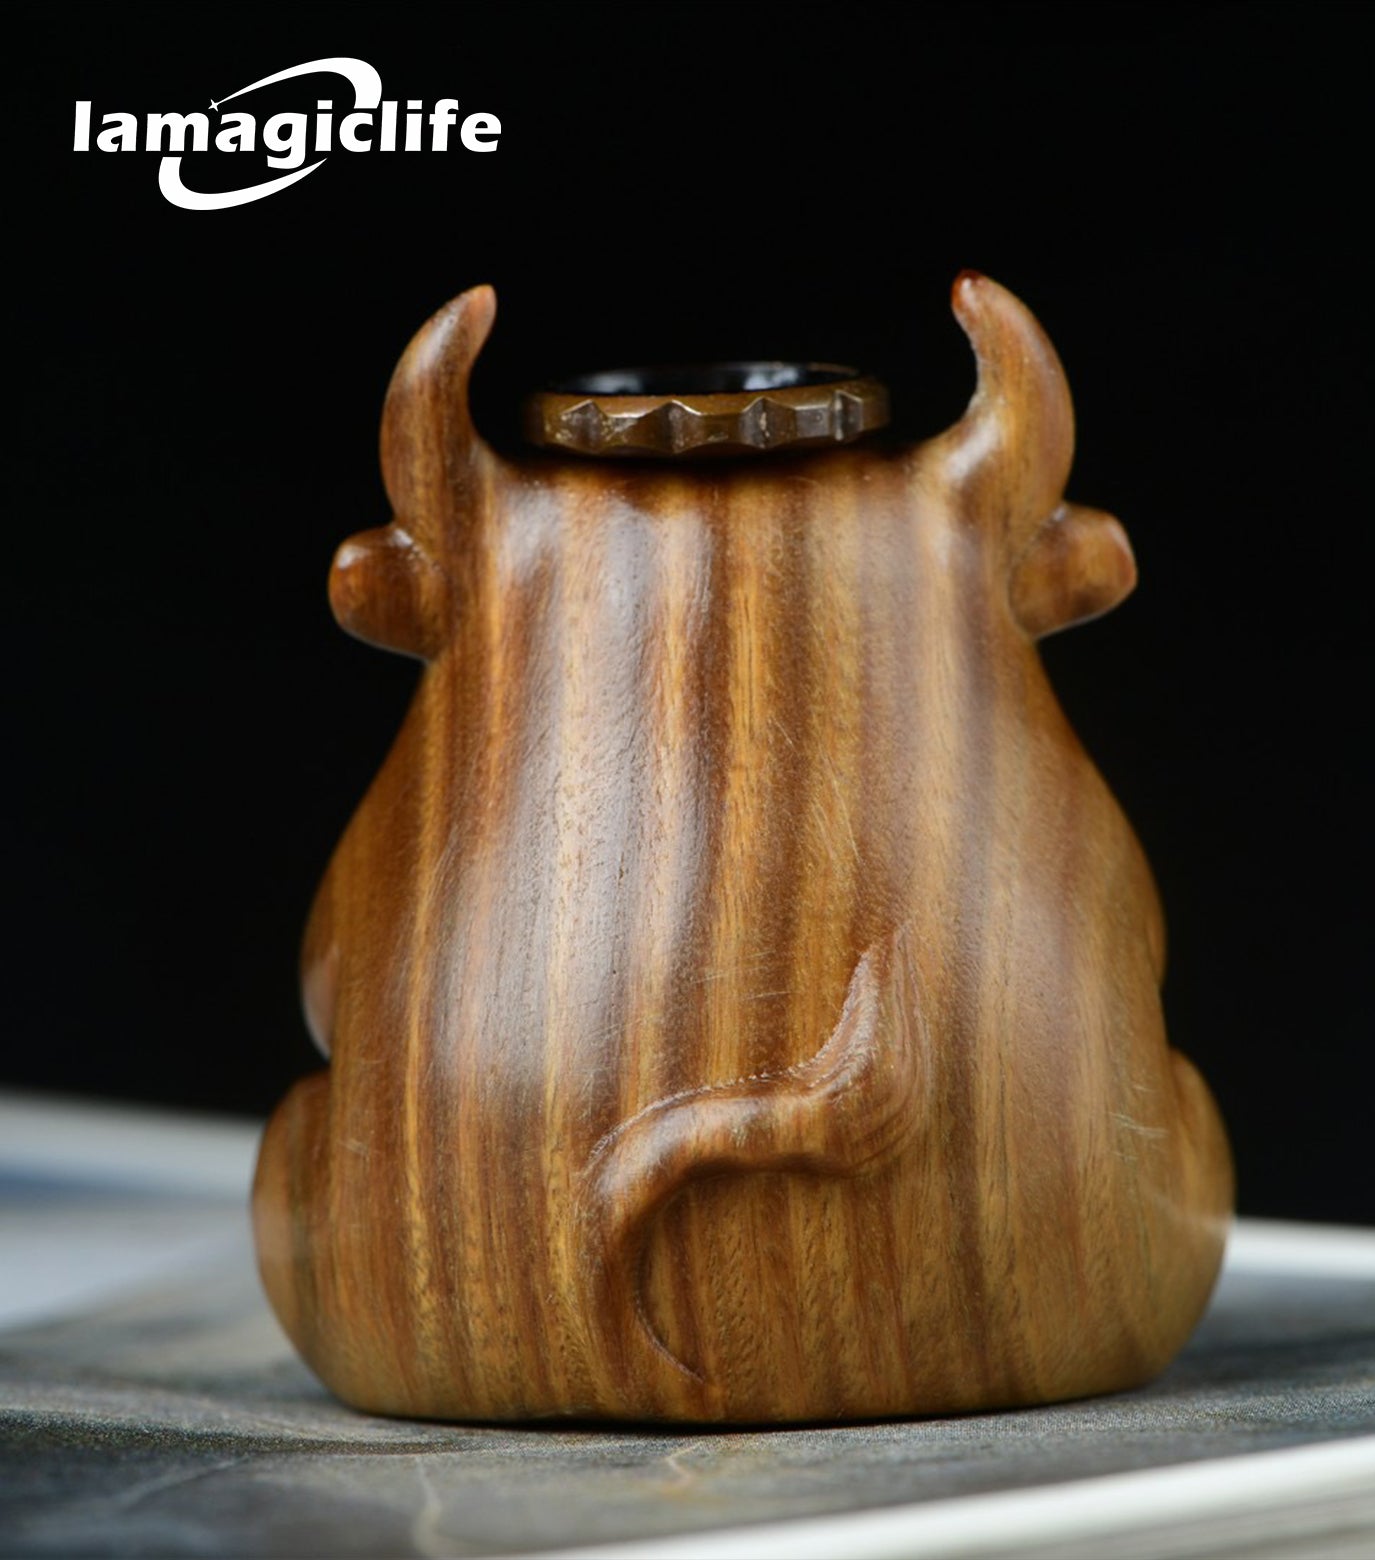 Lamagiclife Green Sandalwood Little Calf Handcrafted Natural Wood Home Decor Toy